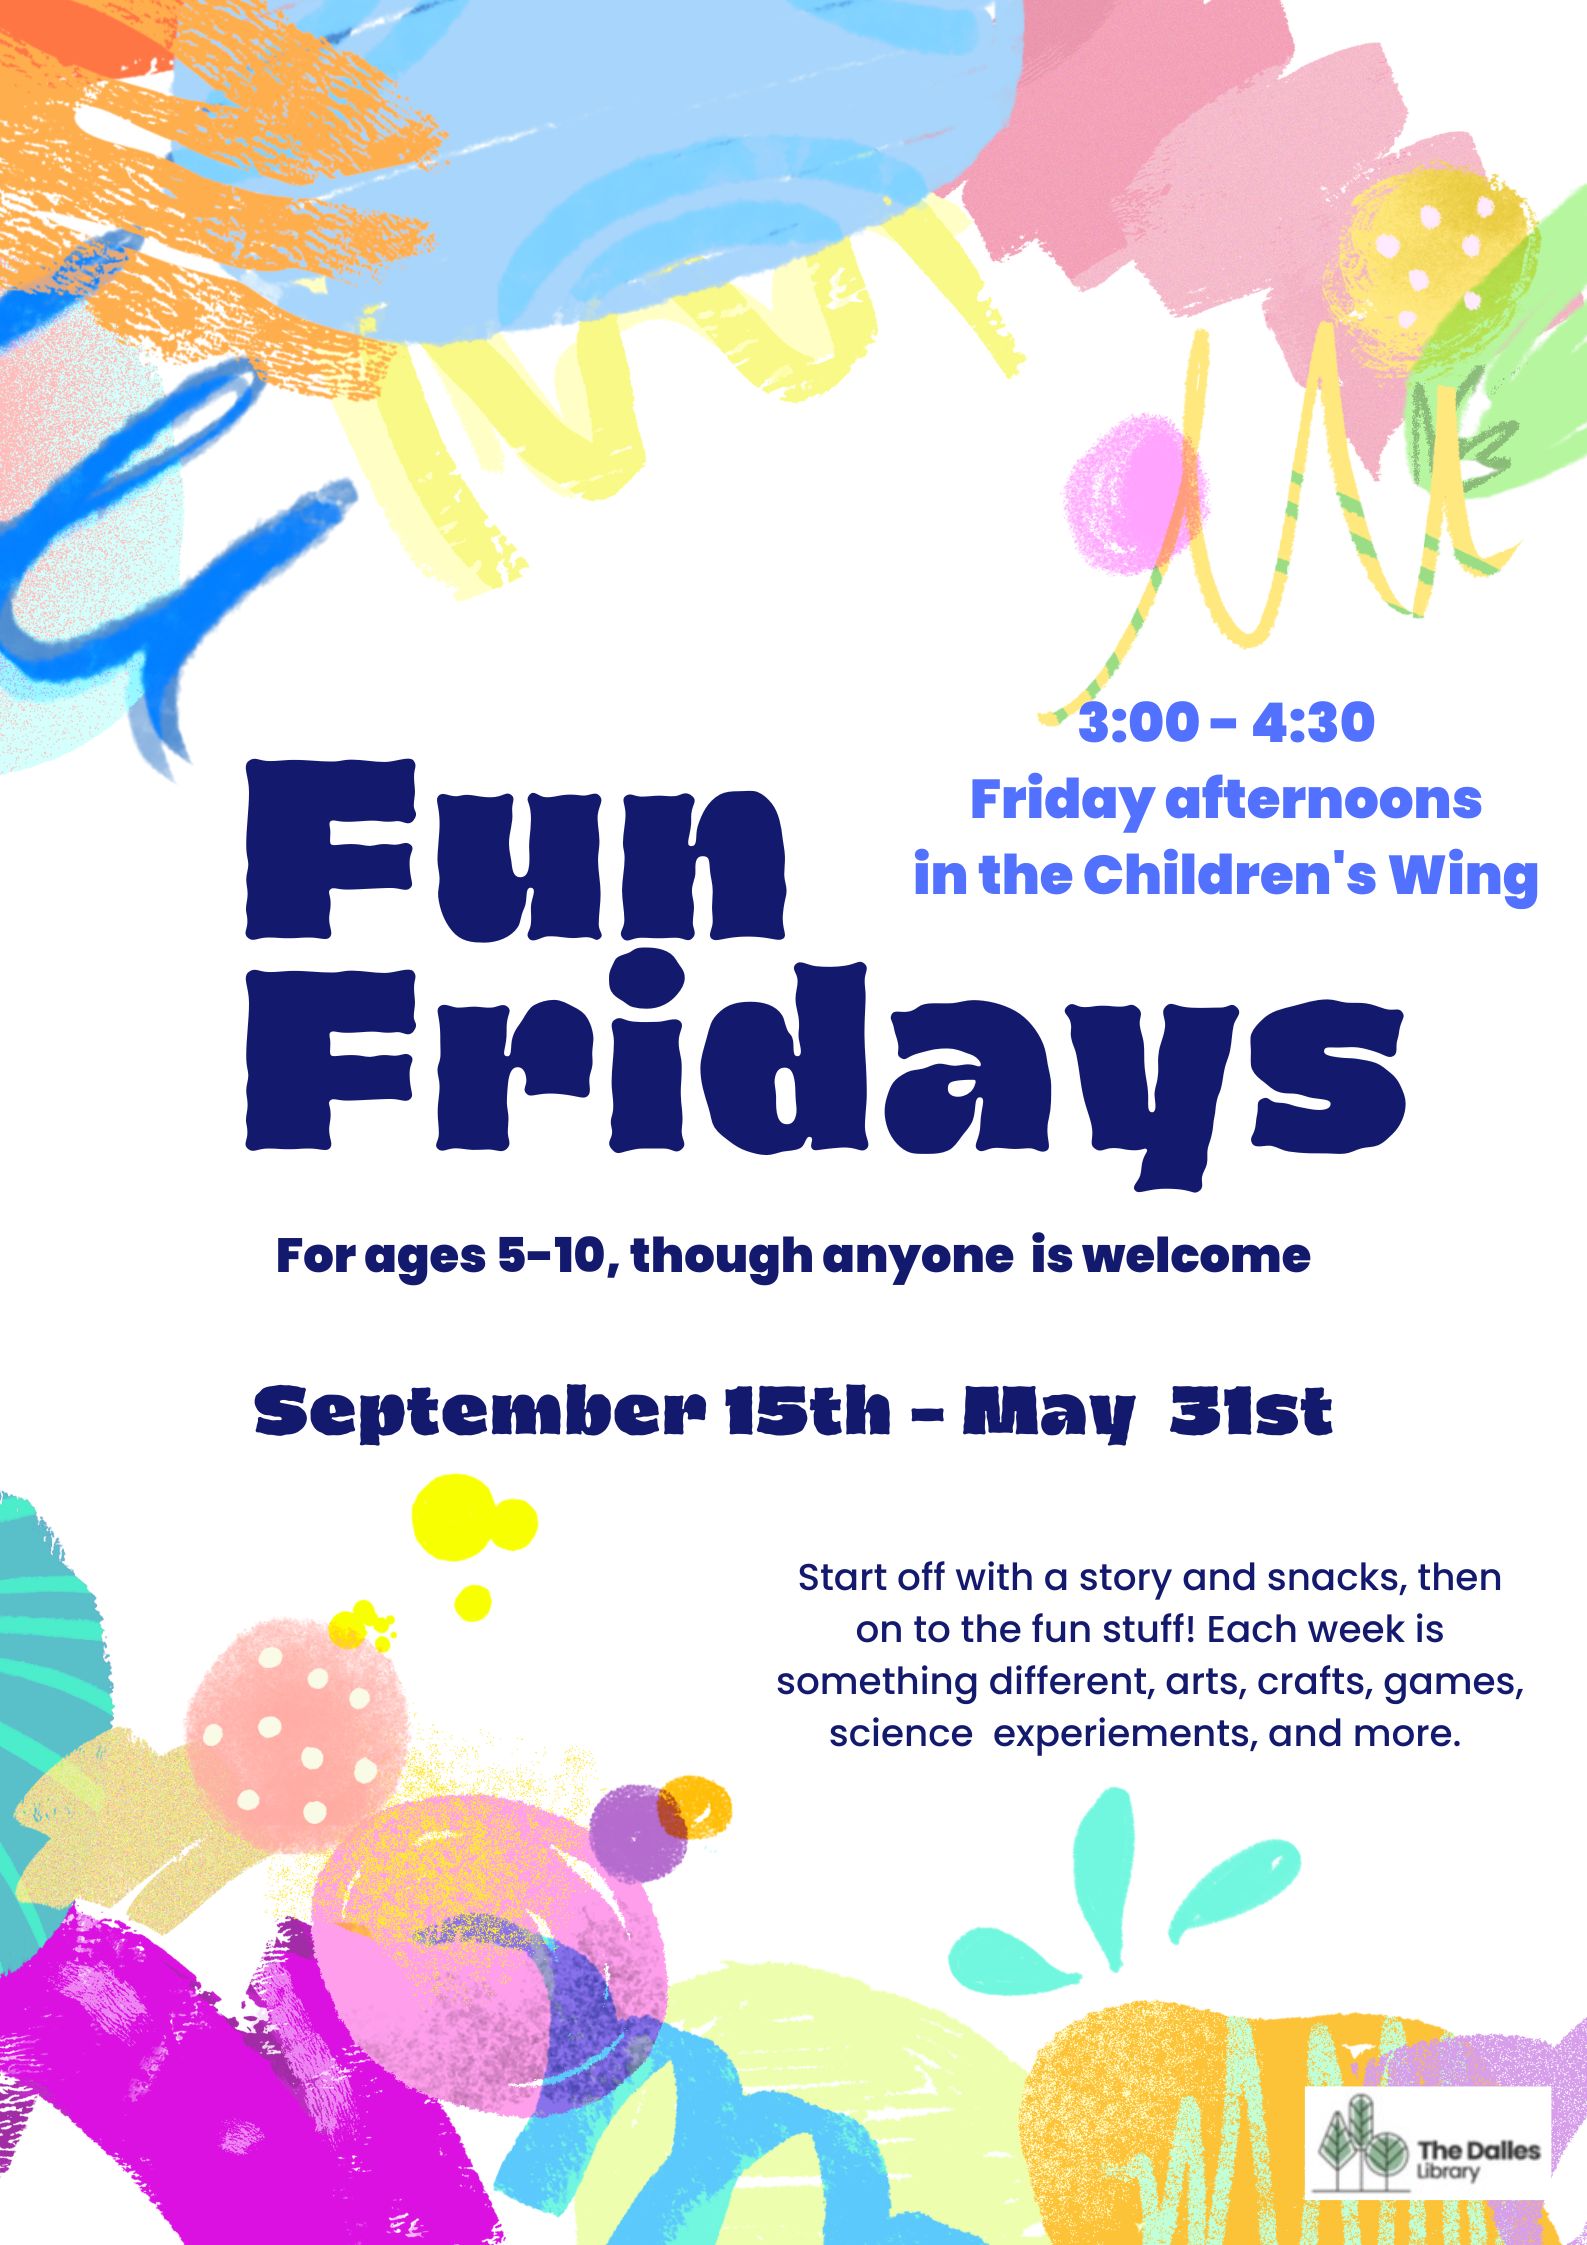 Fun Fridays are held every Friday, from September 15th through May 31st